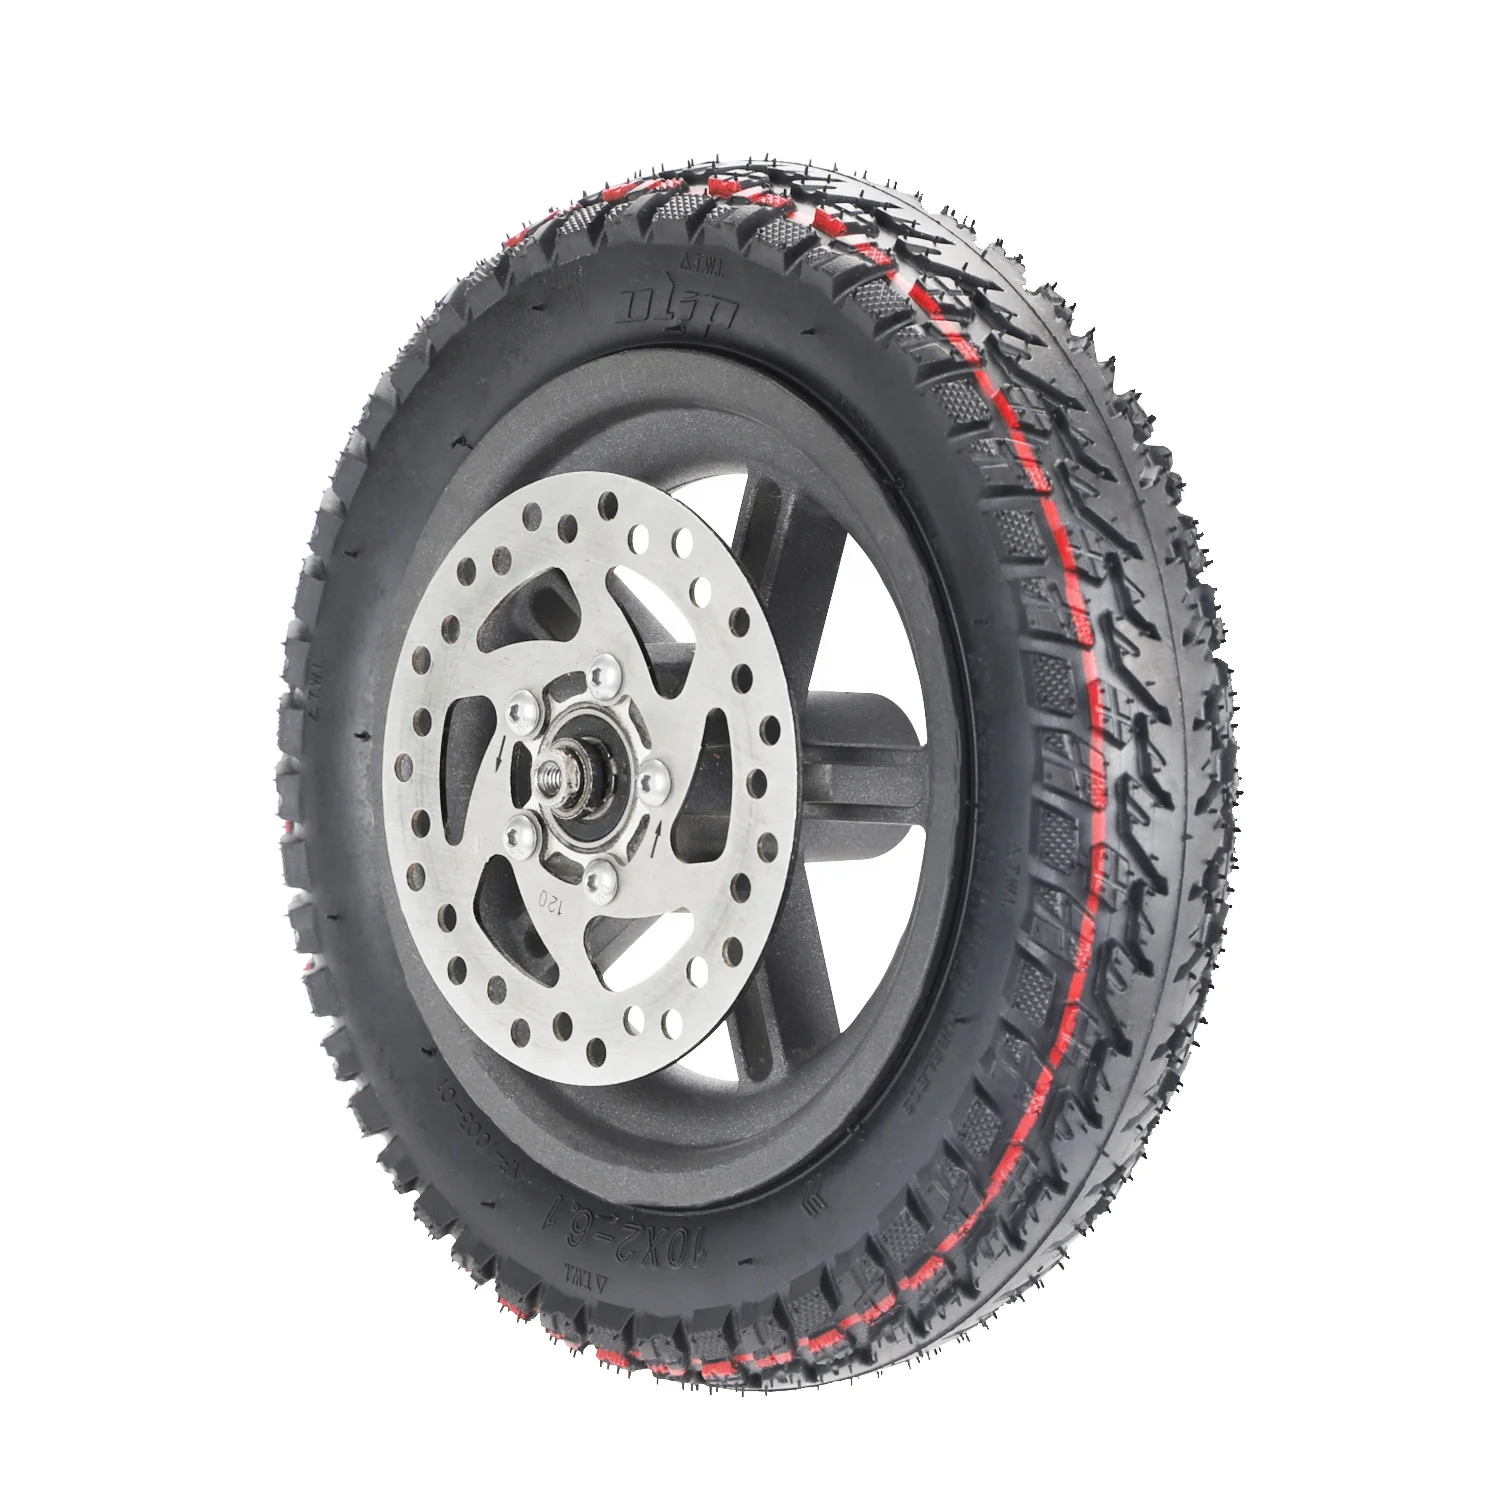 Wholesale ULIP 10*2-6.1 Off Road Tubeless Tire Xiaomi M365/Pro/Pro 2./1S/3 Scooters 10 Inch Scooter Tyre Off-road Vacuum Tyre From m.alibaba.com